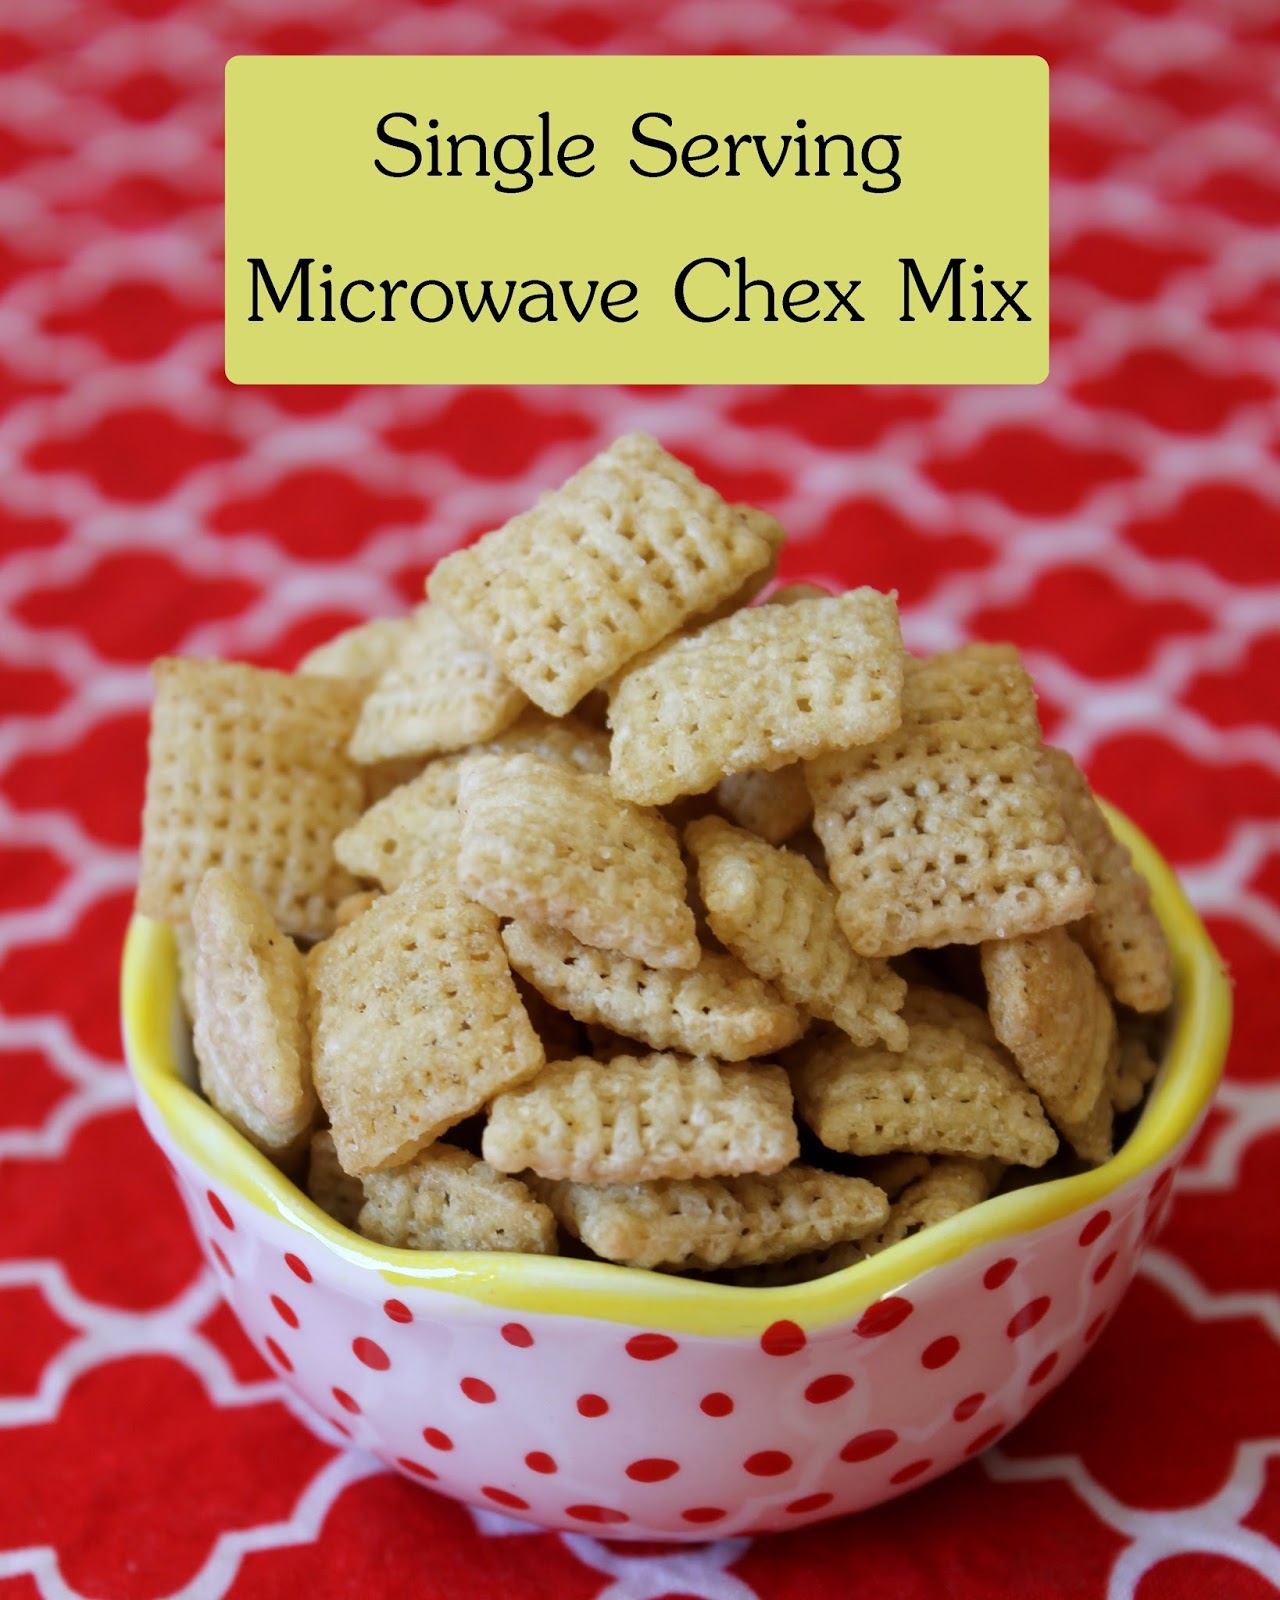 Auntie Bethany - The Best Gluten Free: Single Serve Microwave Chex Mix